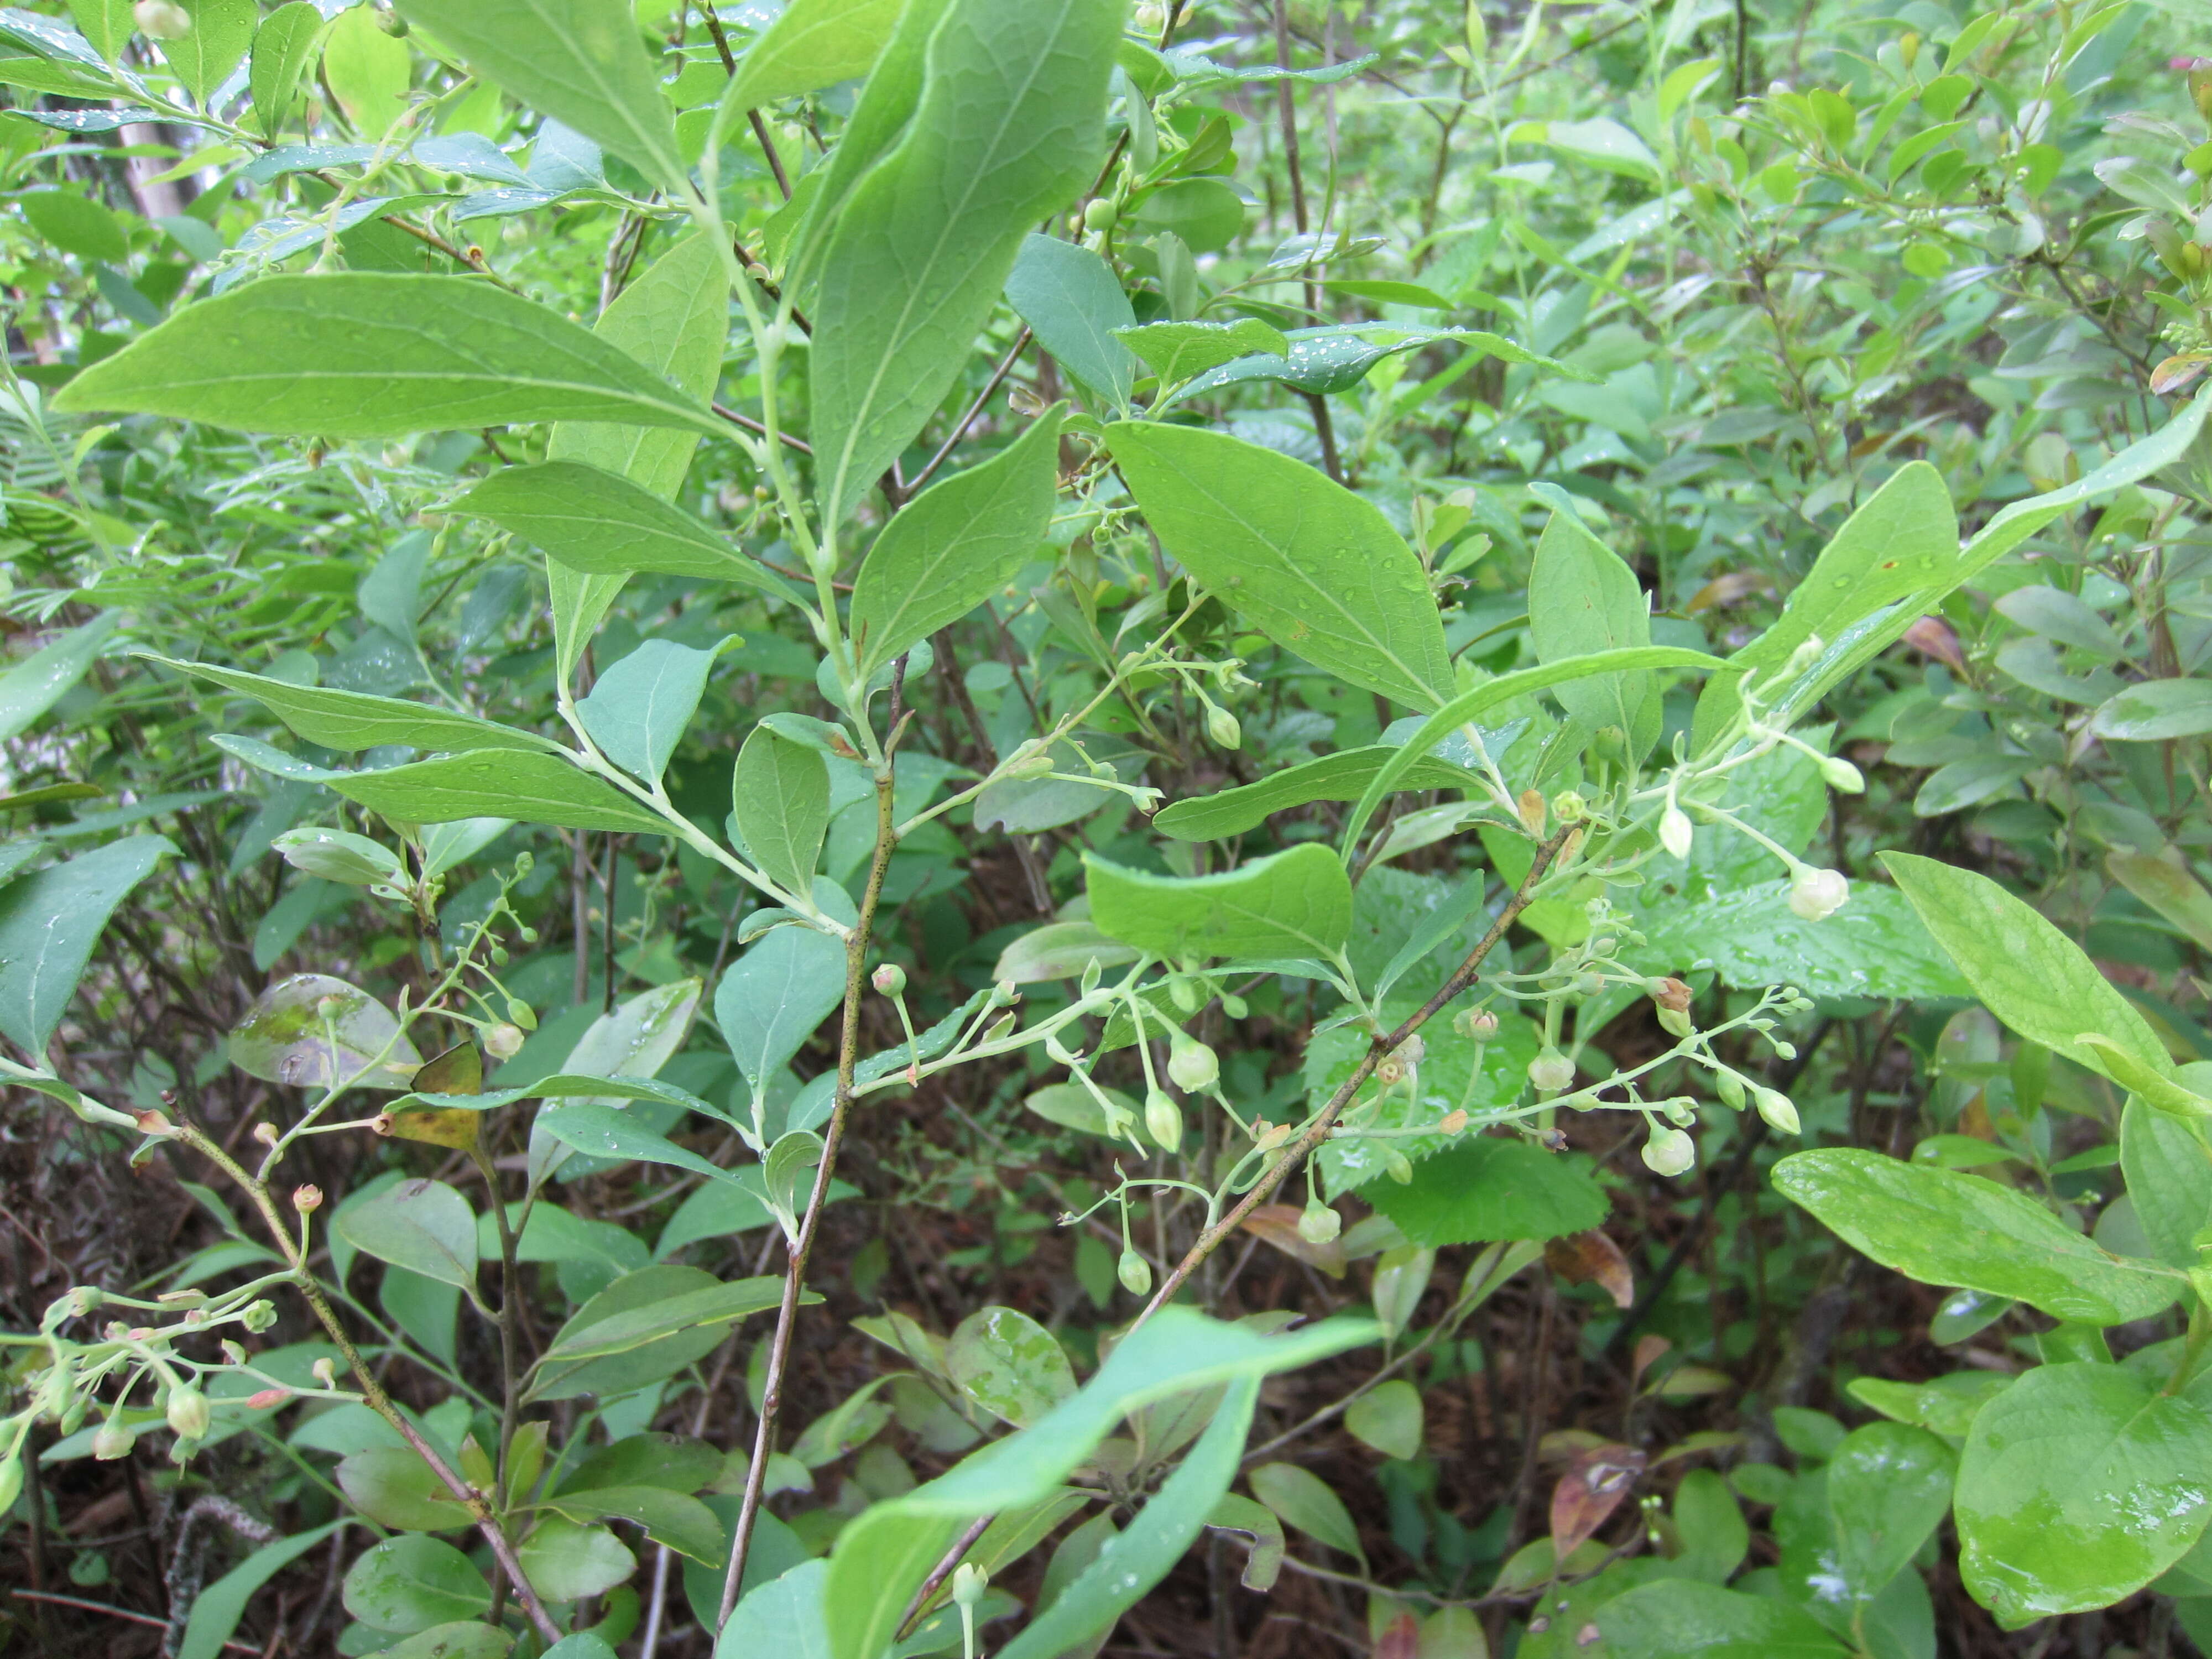 Image of blue huckleberry